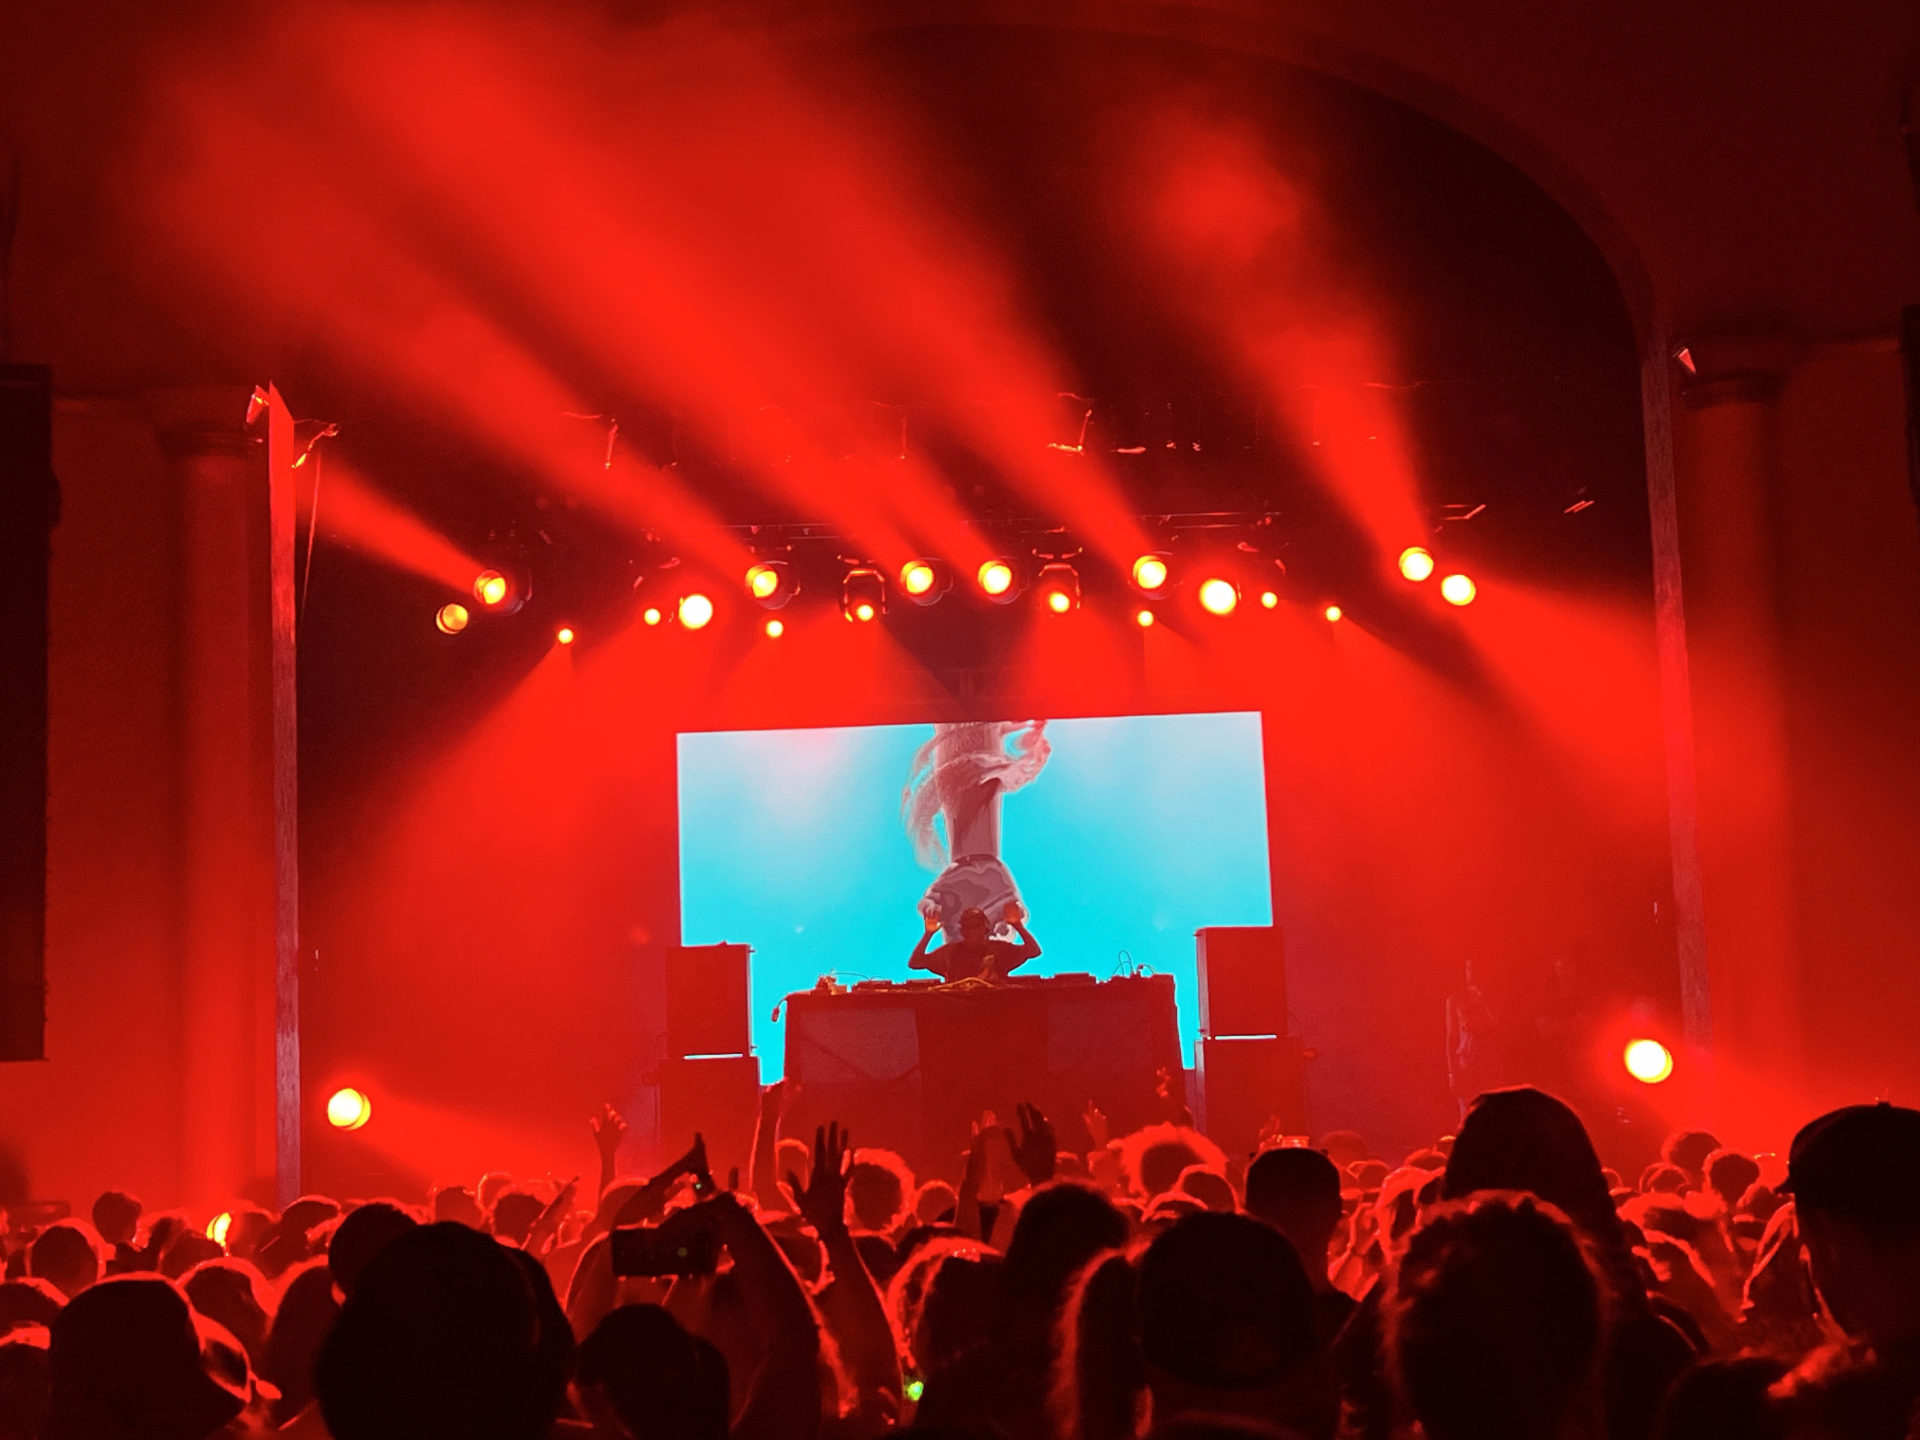 Phase one performing at the Mcdonald Theatre with Red lights and light blue visuals.